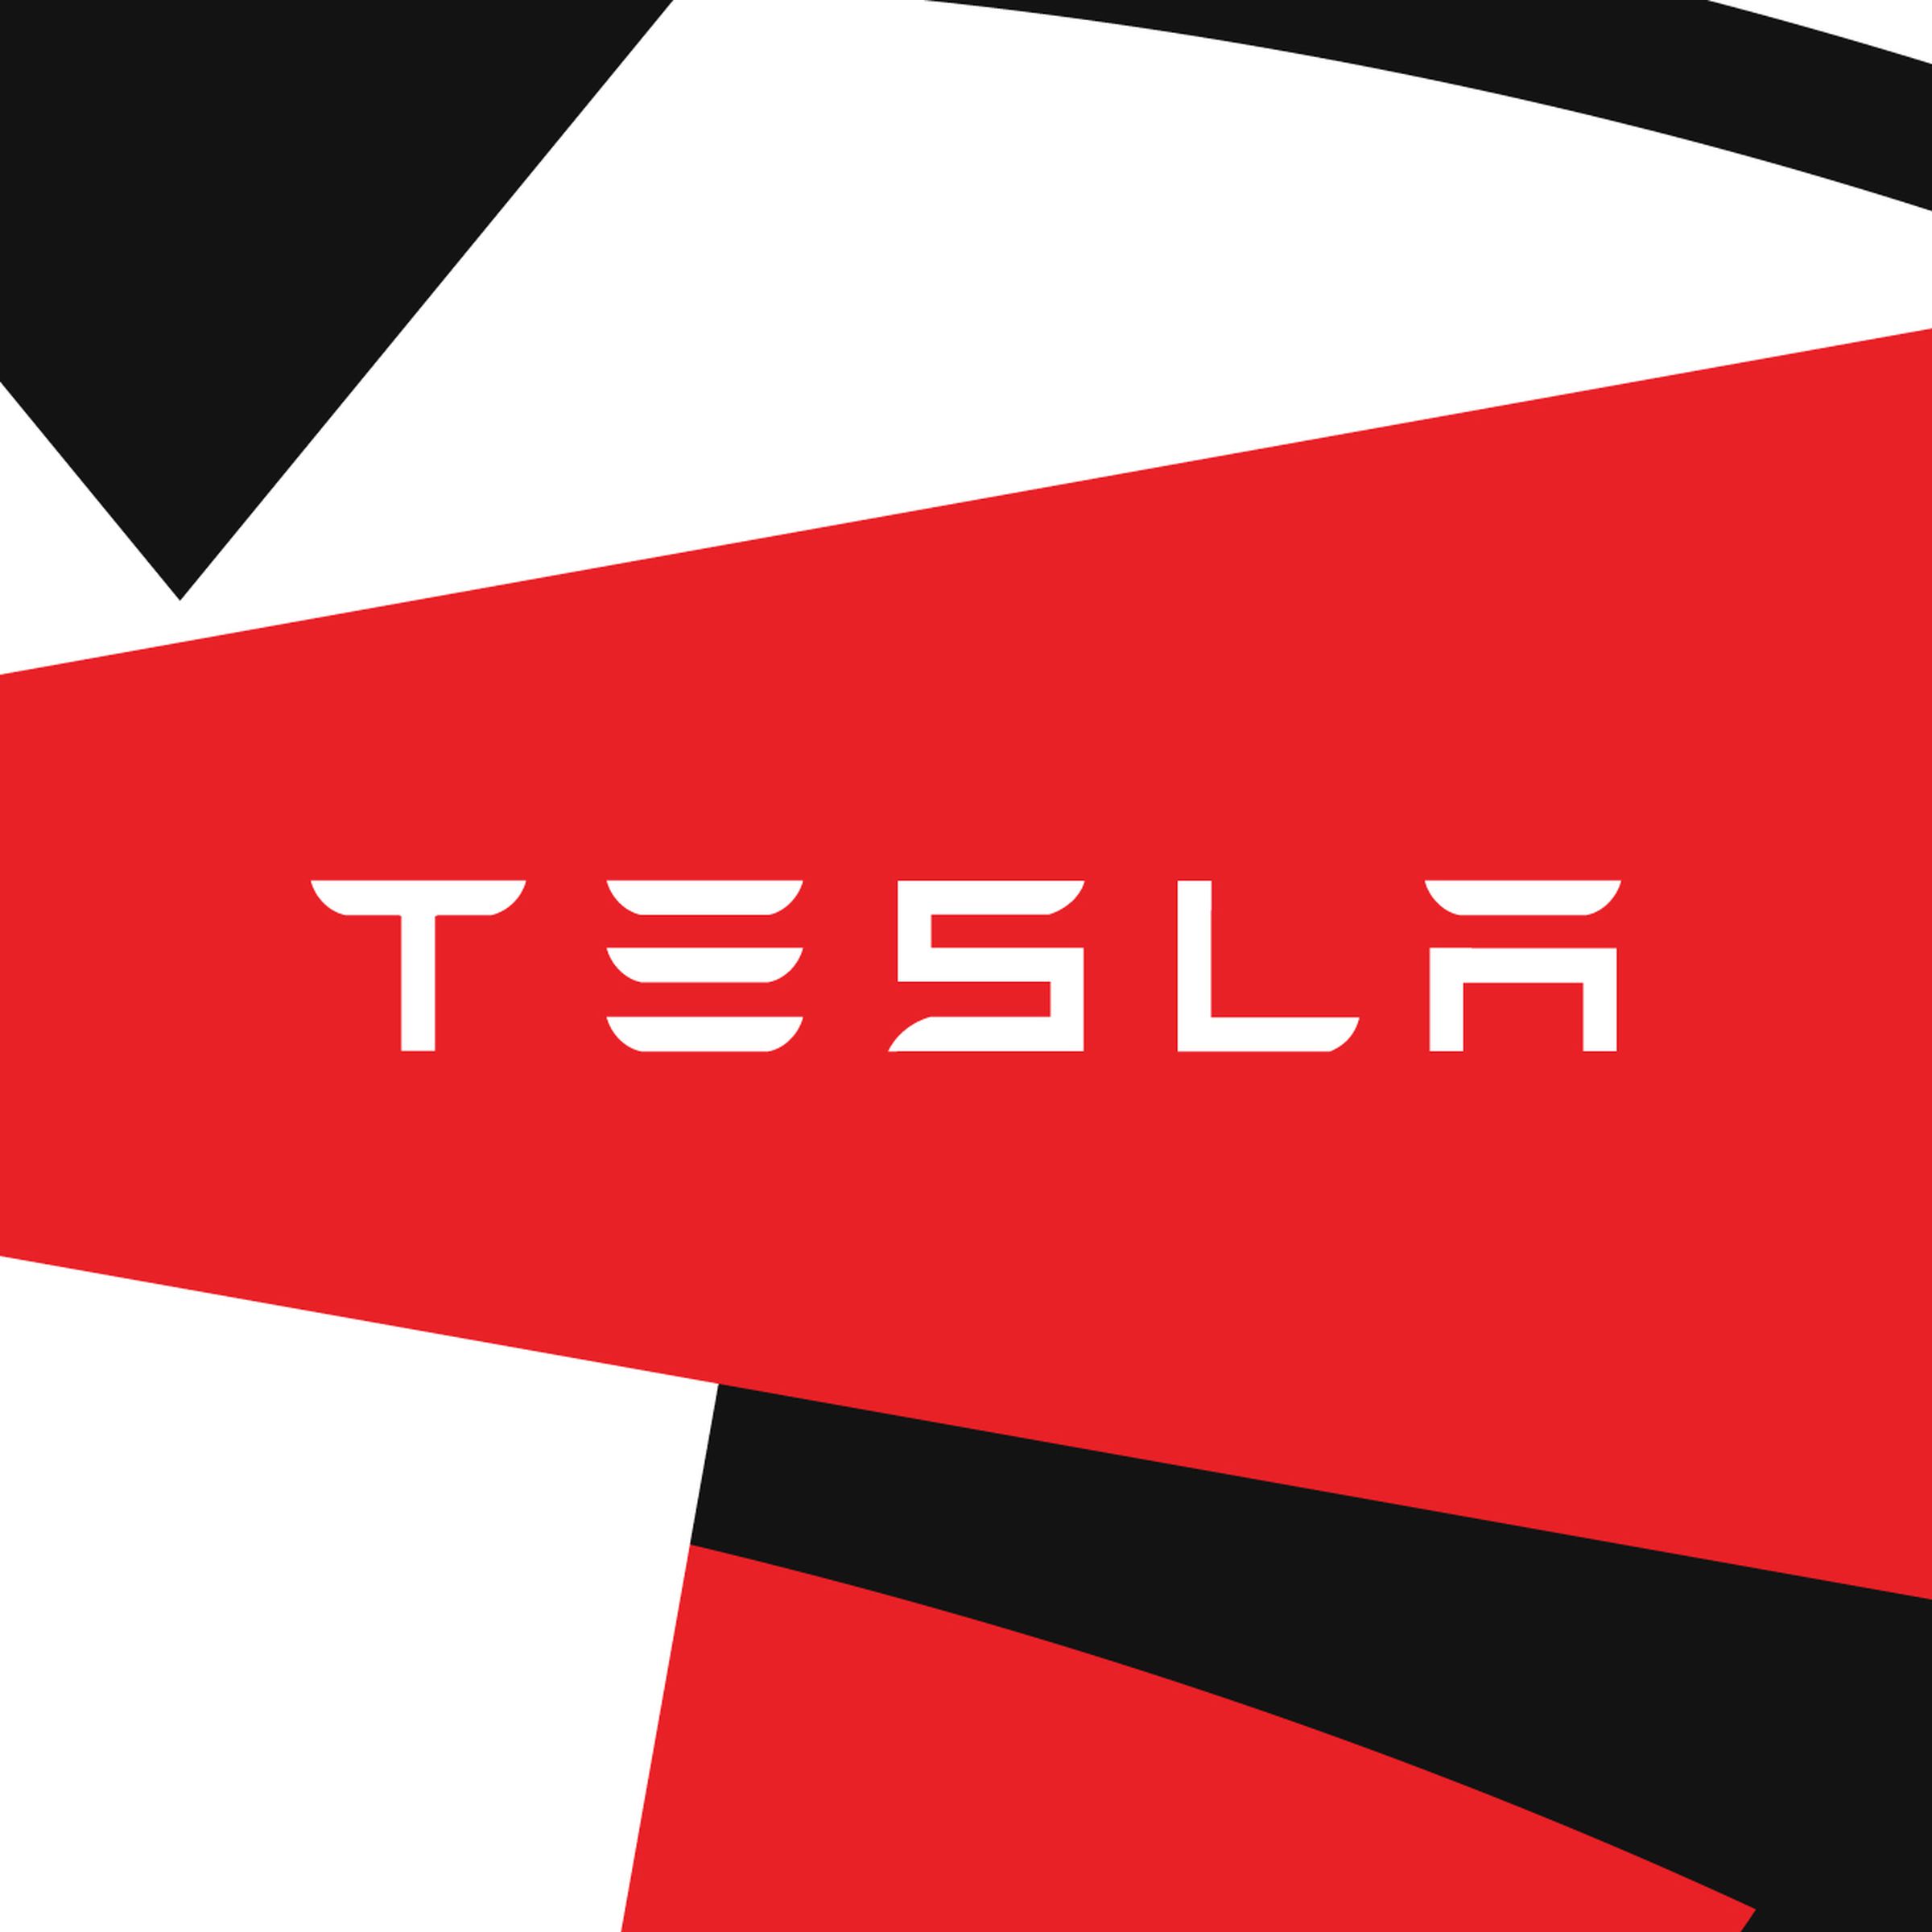 The Tesla logo on a red, black, and white background.